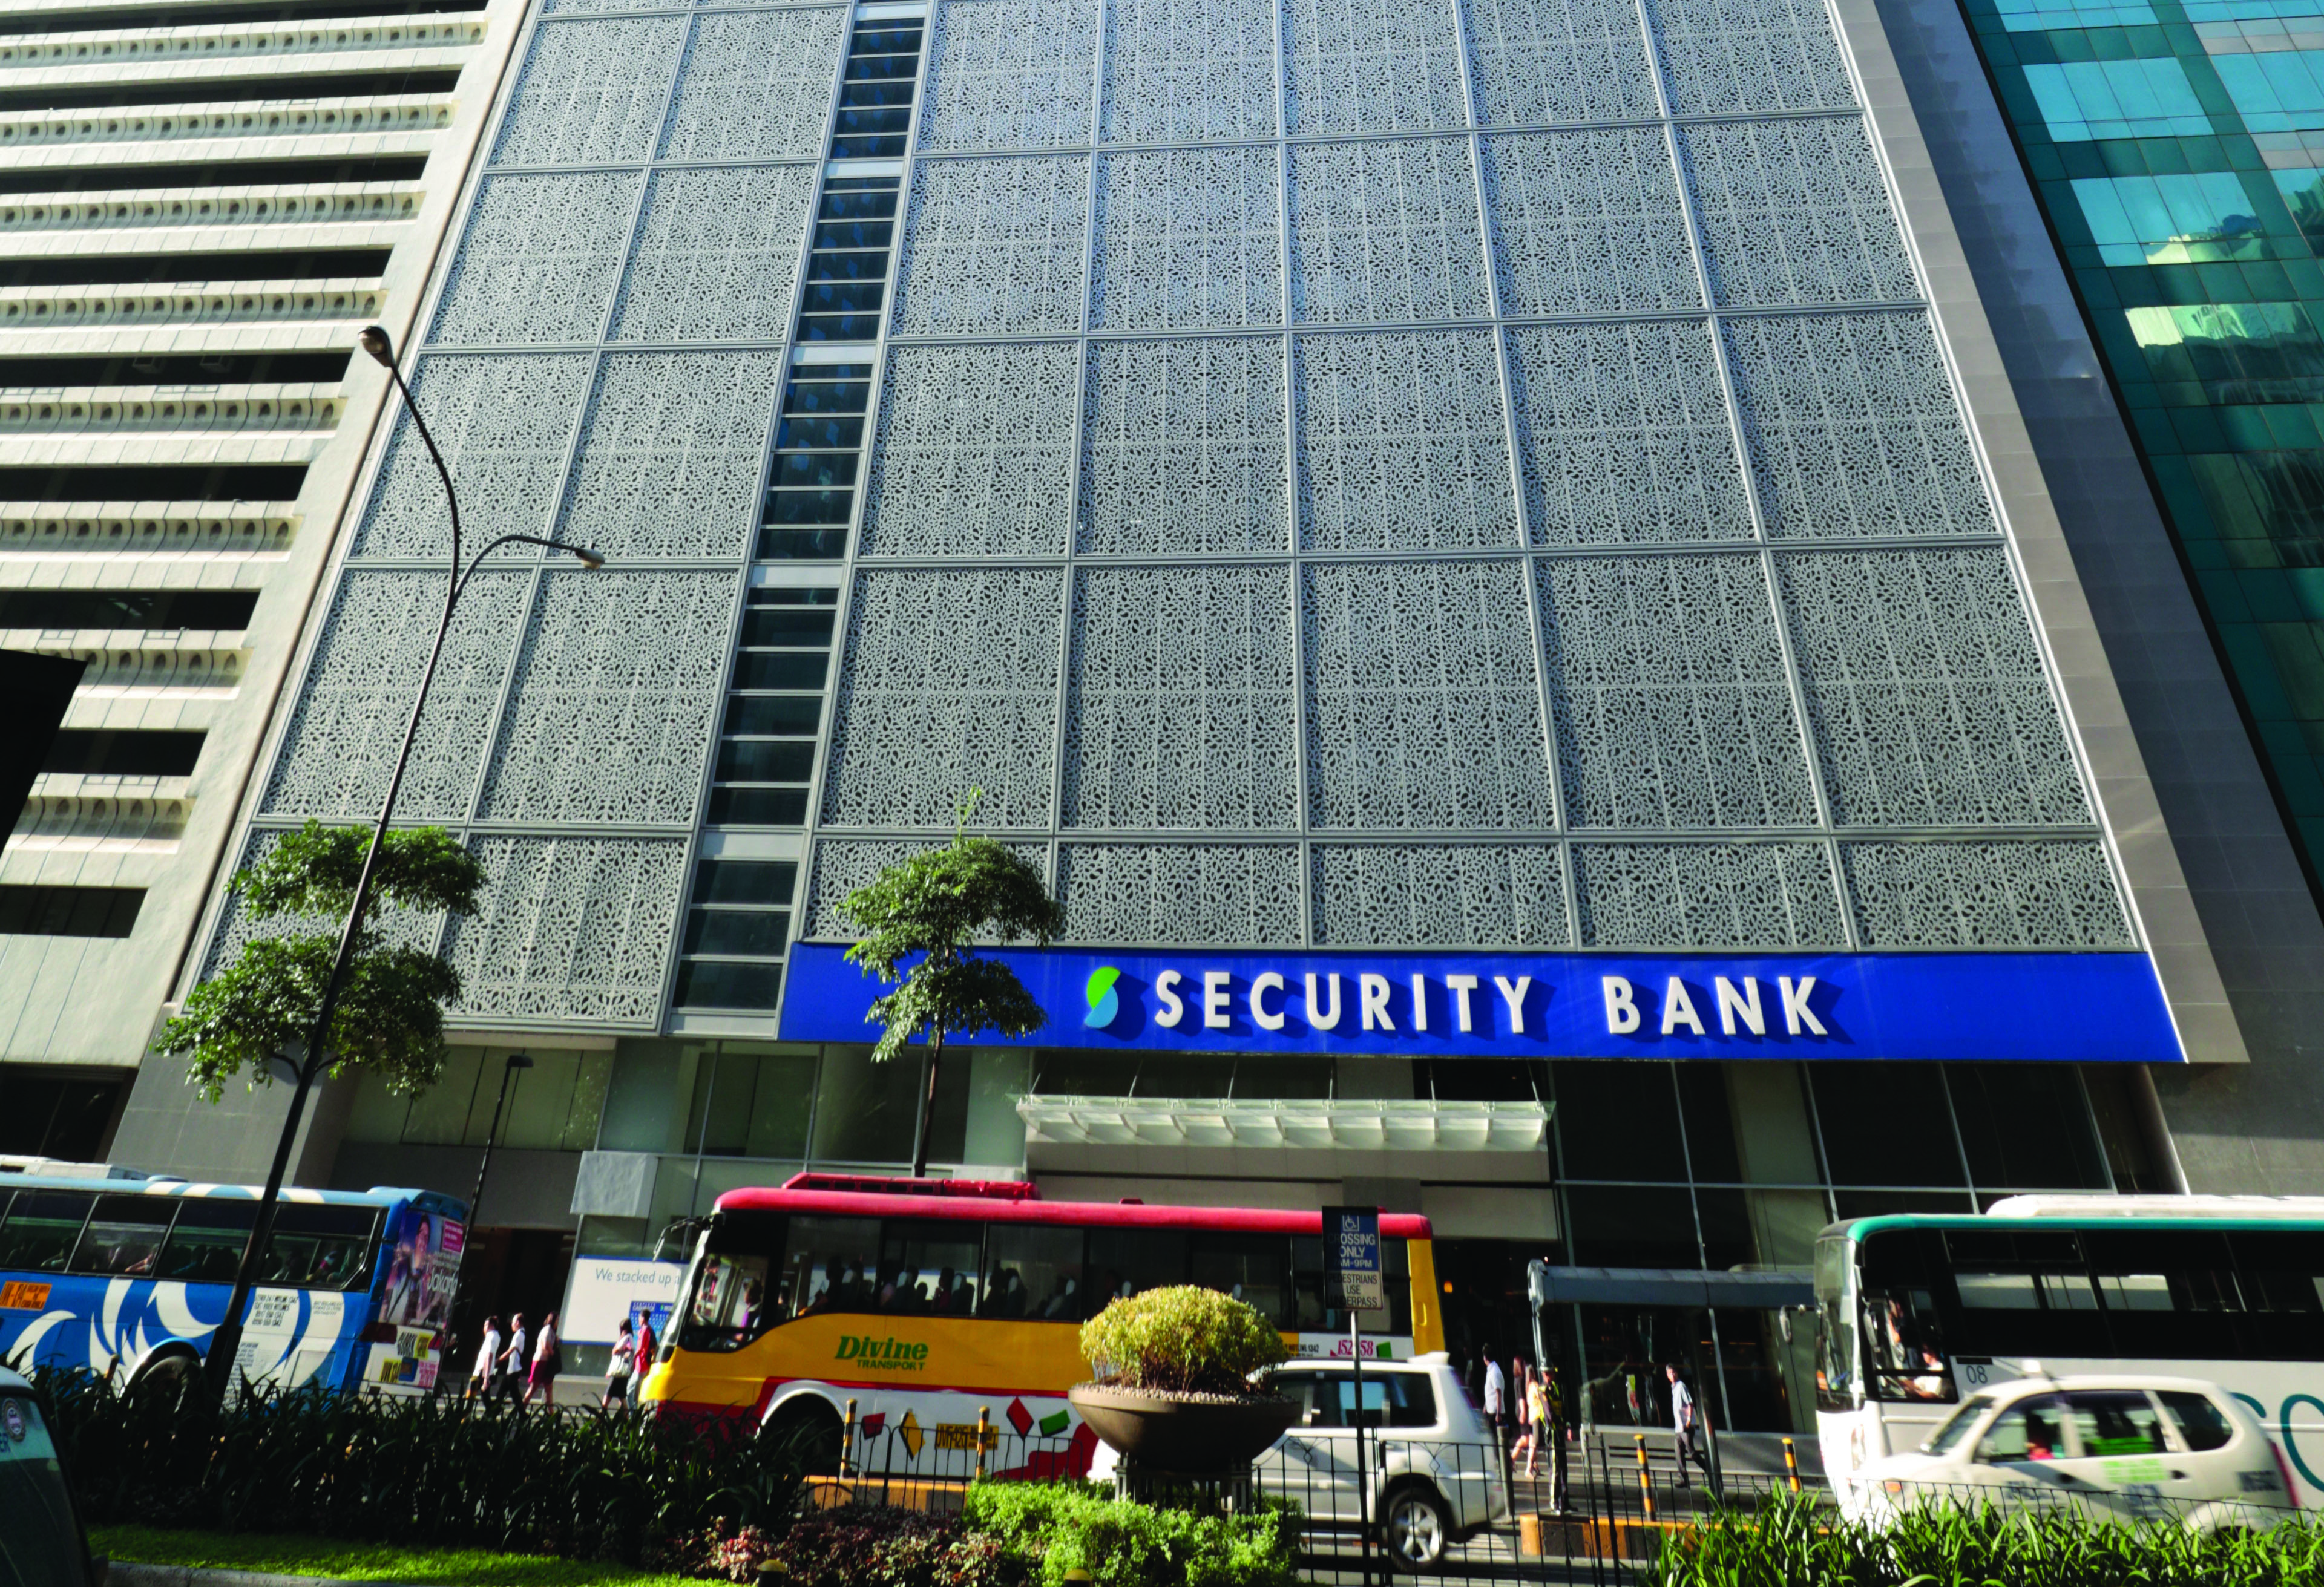 Security Bank names expat as new CEO